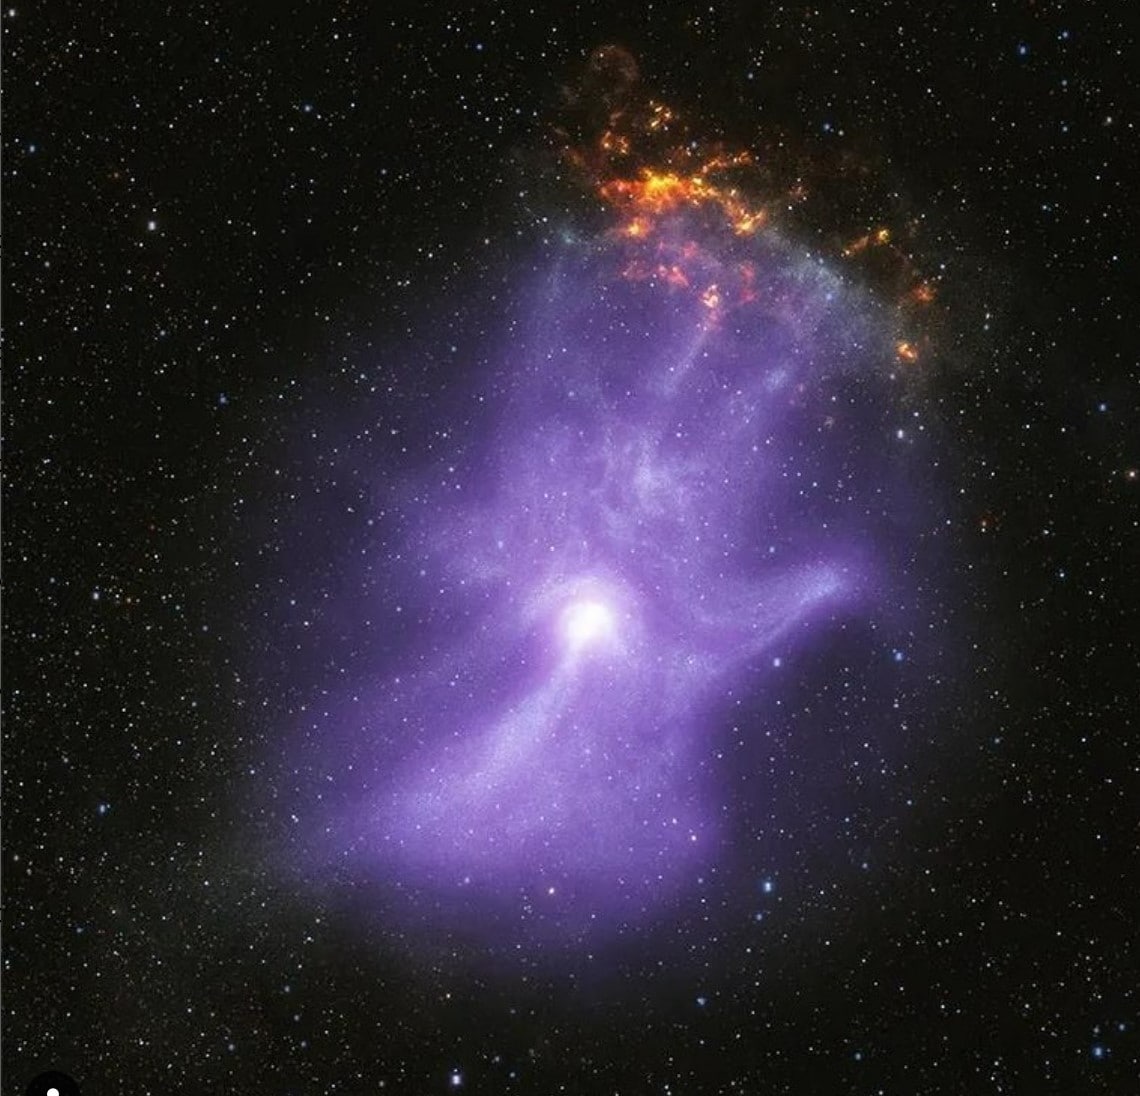 NASA's Chandra X ray observatory captured the image of the pulsar,a fast spinning dense neutron star.